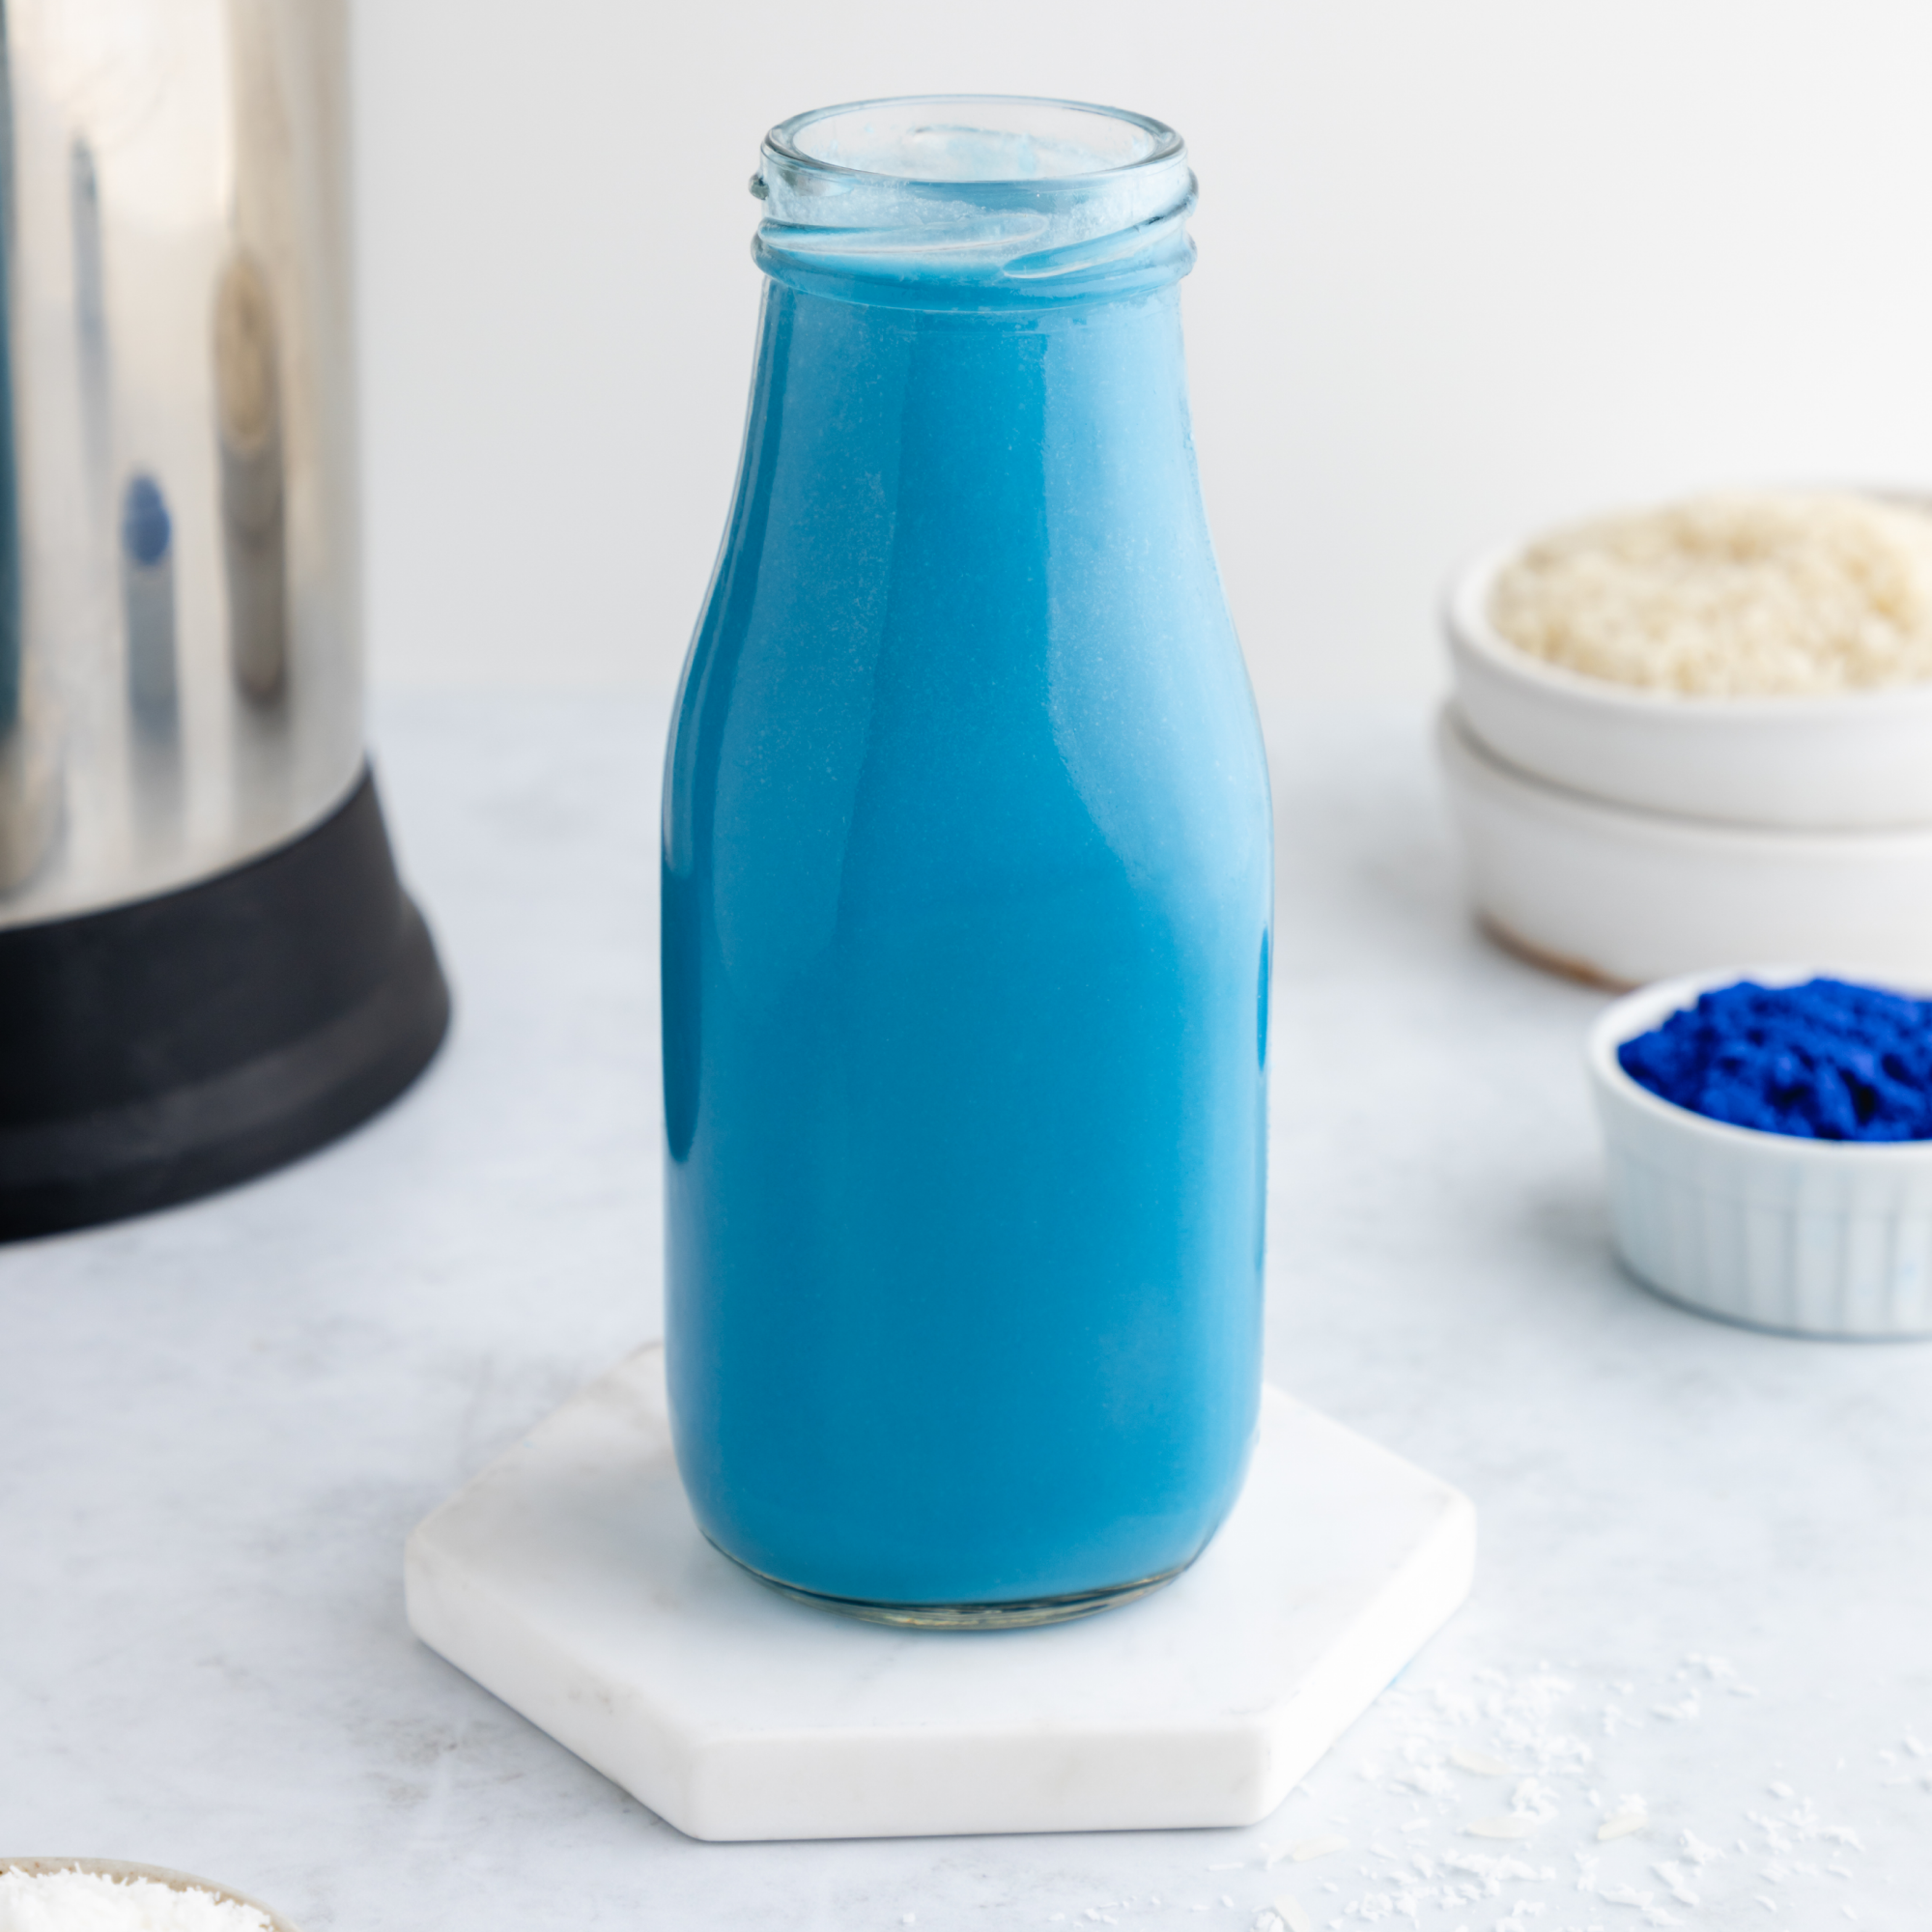 Looking for a fun and delicious new milk recipe to make? Look no further than our Blue Milk. Featuring ingredients like pineapple, lime, dragon fruit and watermelon extract and blue spirulina to get that vibrant color!